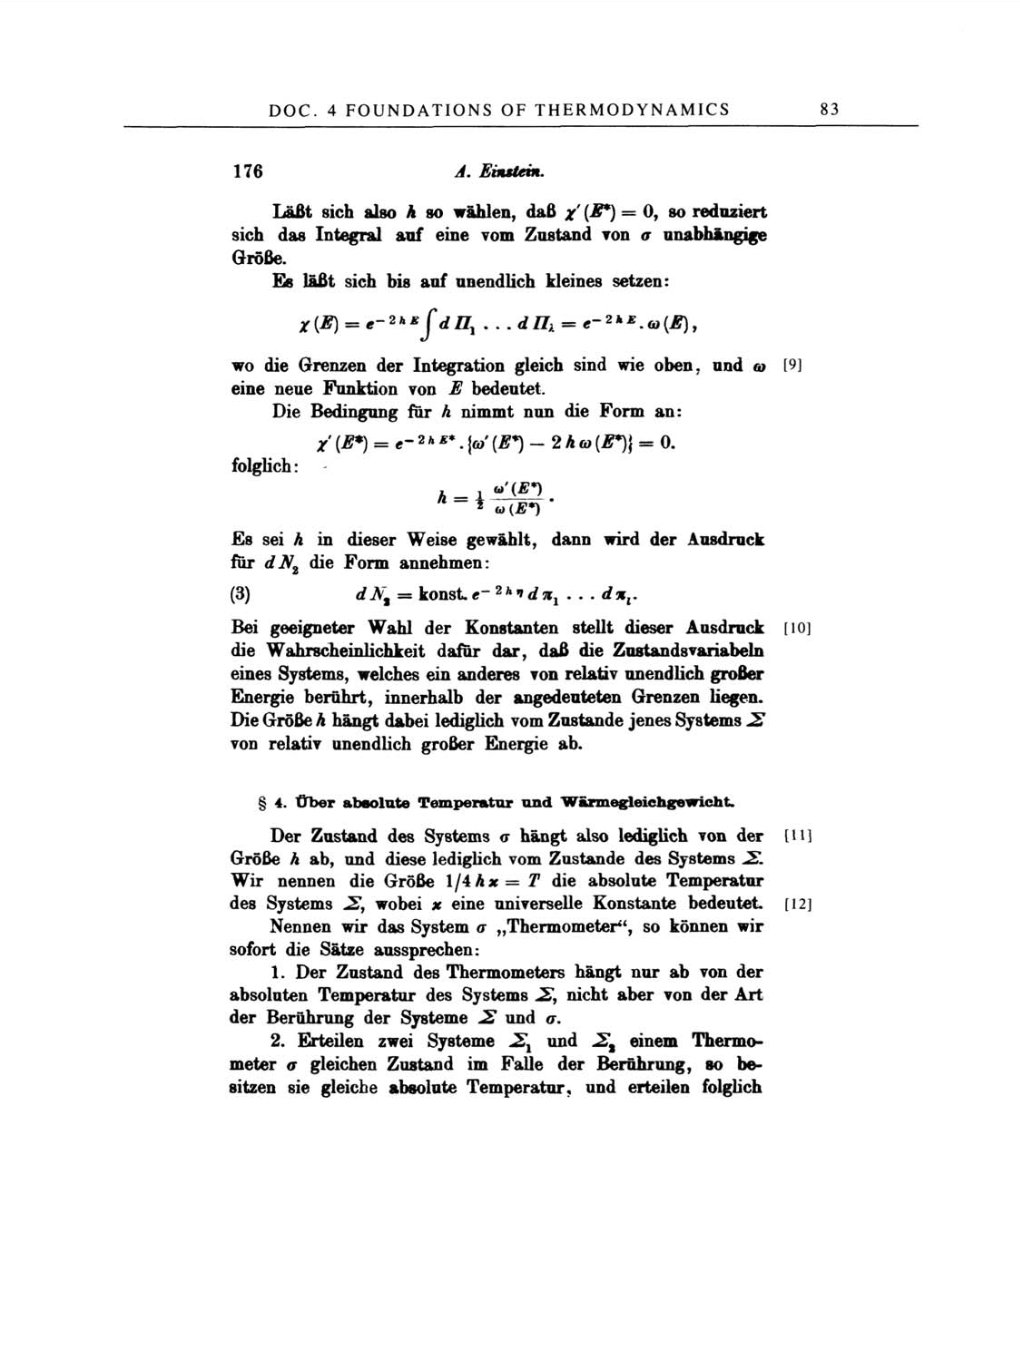 Volume 2: The Swiss Years: Writings, 1900-1909 page 83